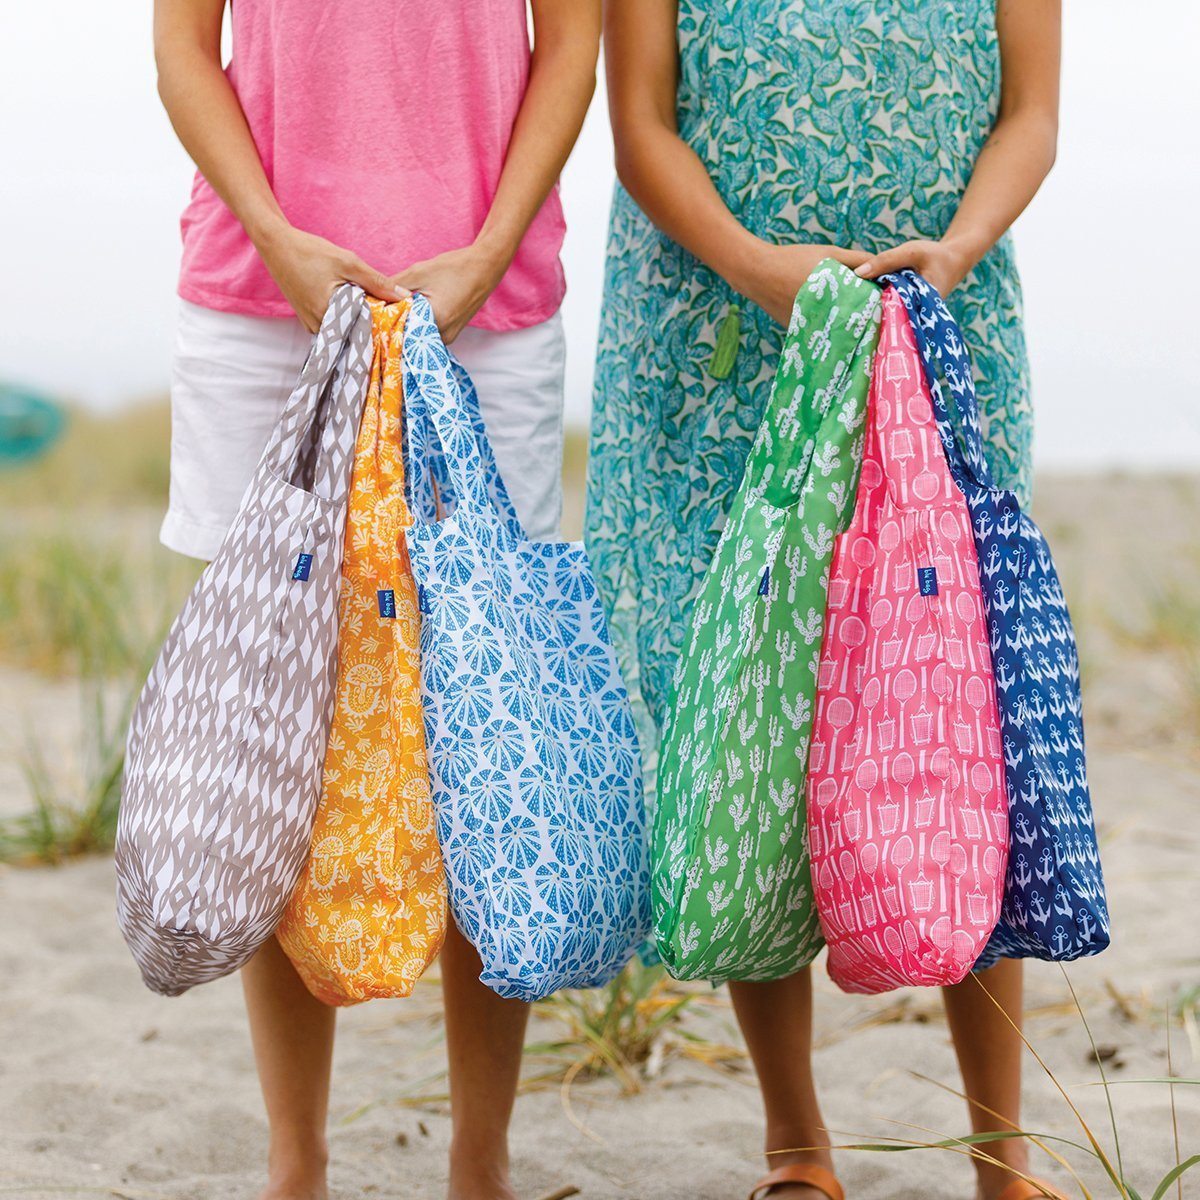 blu bags- colorful, eco friendly, reusable shopping bags